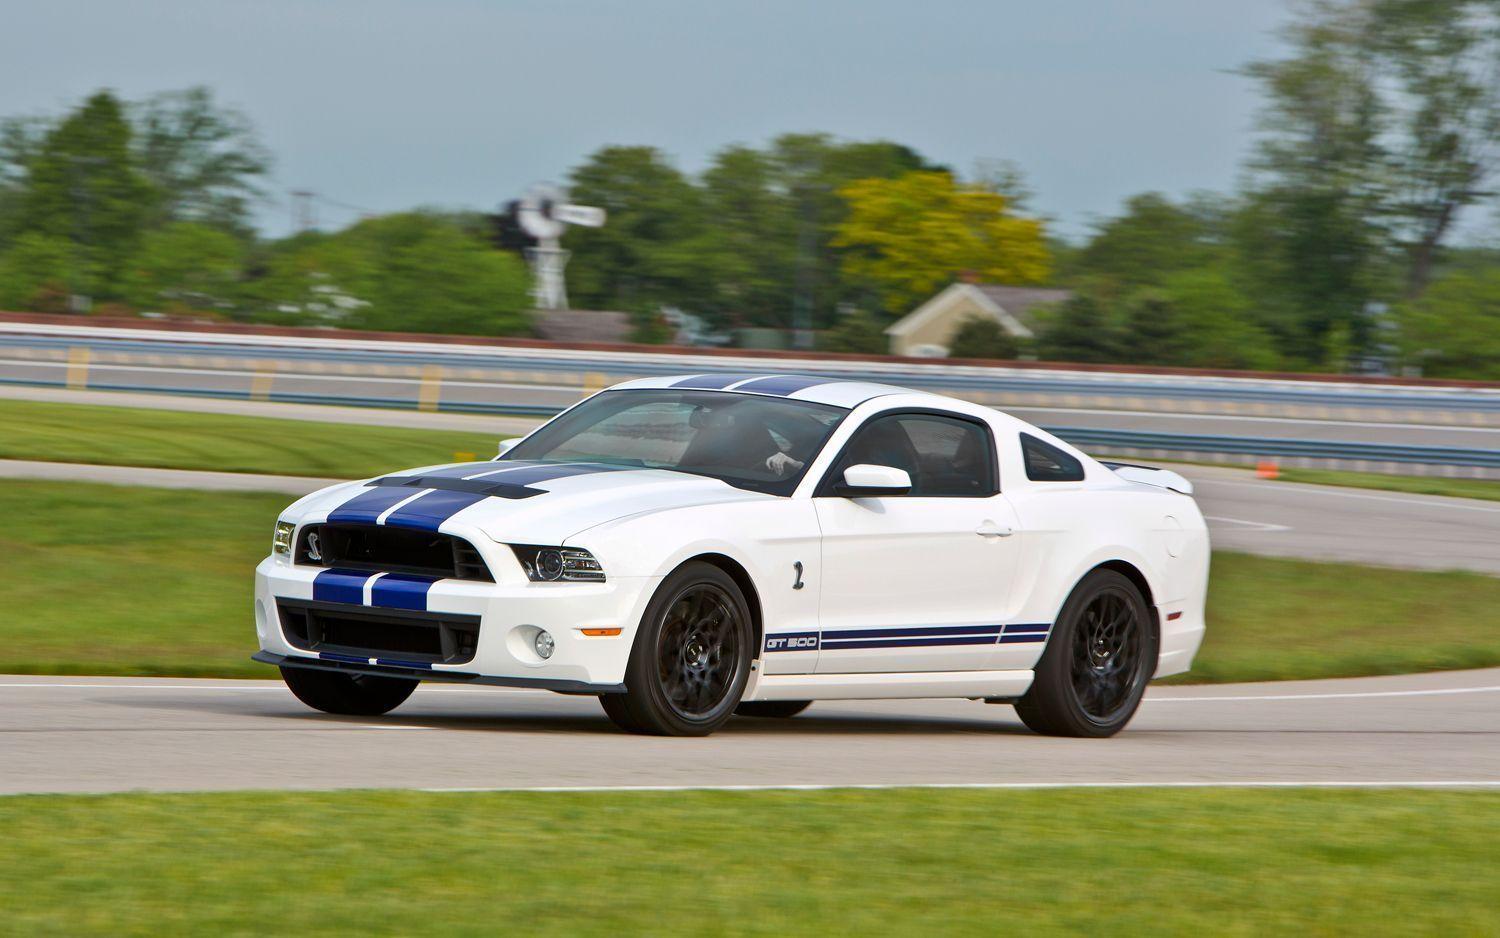 Ford Mustang Shelby GT500 Concept Wallpaper (8842). Cool Car